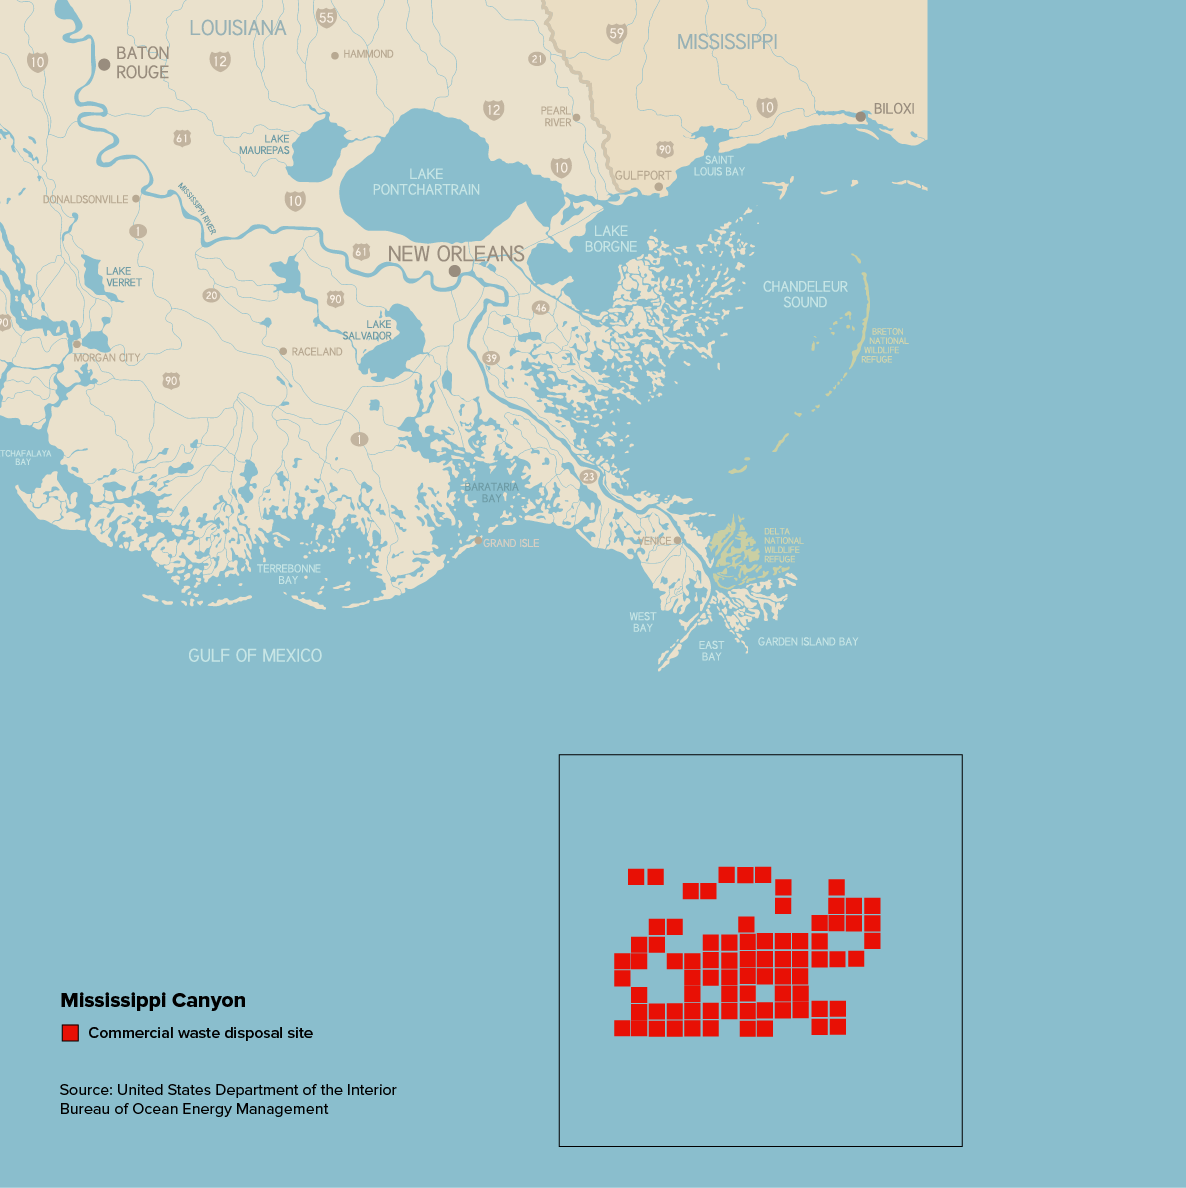 This map shows the offshore leasing blocks where dumped waste barrels have been <a href="https://www.boem.gov/sites/default/files/oil-and-gas-energy-program/Leasing/Regional-Leasing/Gulf-of-Mexico-Region/Lease-Sales/252/Sale-252-Information-to-Lessees.pdf" target="_blank" role="link" class=" js-entry-link cet-external-link" data-vars-item-name="detected" data-vars-item-type="text" data-vars-unit-name="6080551be4b03fc5b217aba9" data-vars-unit-type="buzz_body" data-vars-target-content-id="https://www.boem.gov/sites/default/files/oil-and-gas-energy-program/Leasing/Regional-Leasing/Gulf-of-Mexico-Region/Lease-Sales/252/Sale-252-Information-to-Lessees.pdf" data-vars-target-content-type="url" data-vars-type="web_external_link" data-vars-subunit-name="article_body" data-vars-subunit-type="component" data-vars-position-in-subunit="1">detected</a> along the seafloor during hazard surveys. 